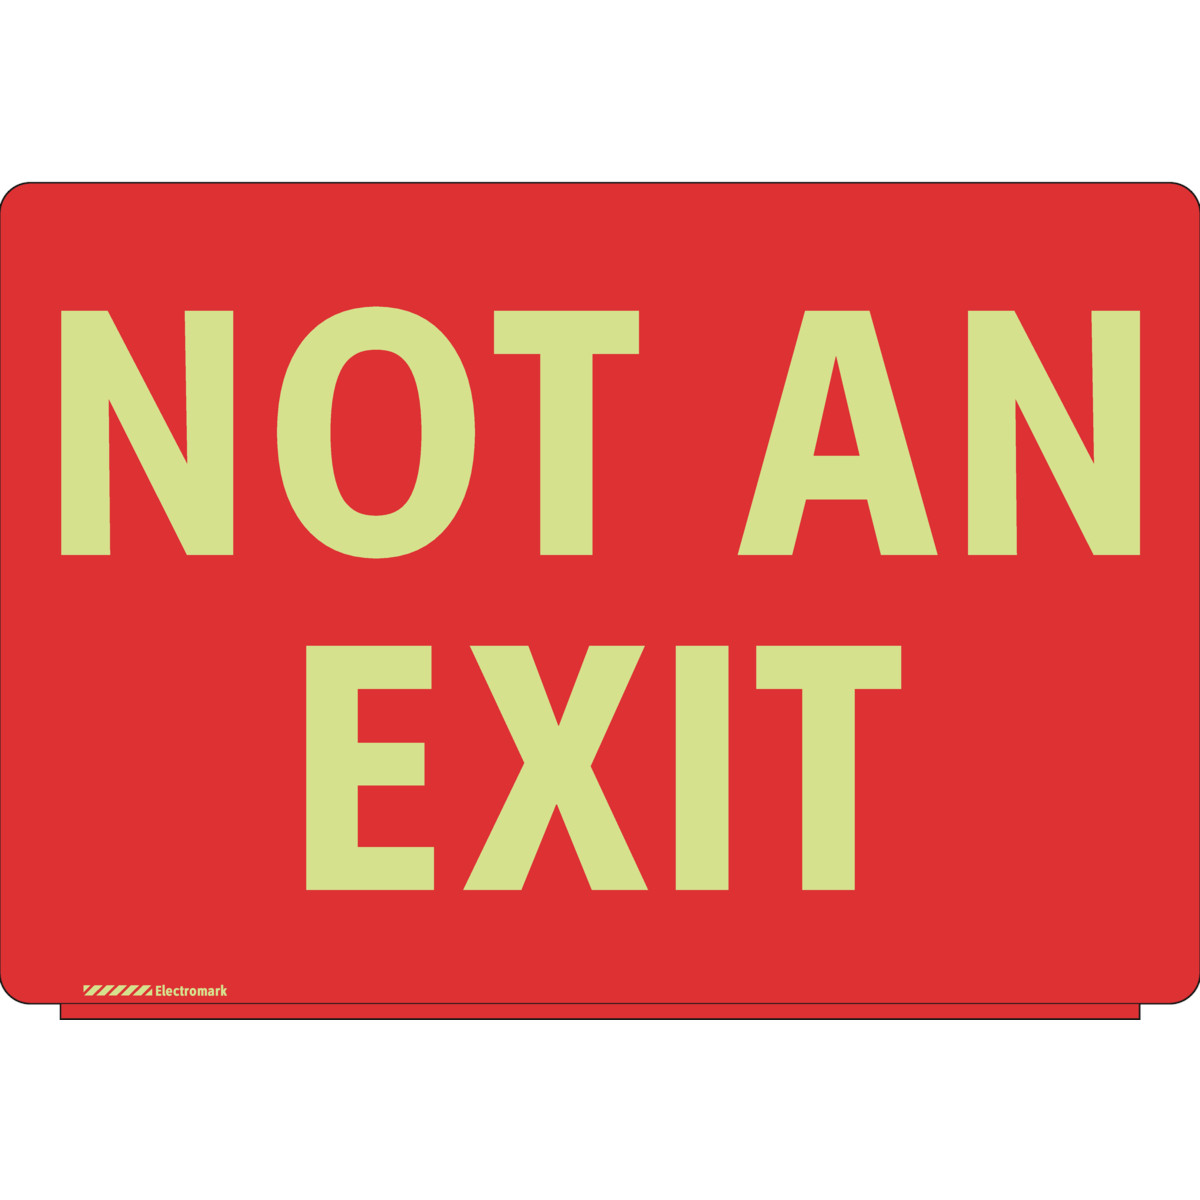 Glow in the Dark Not An Exit Sign - 10"h x 14"w